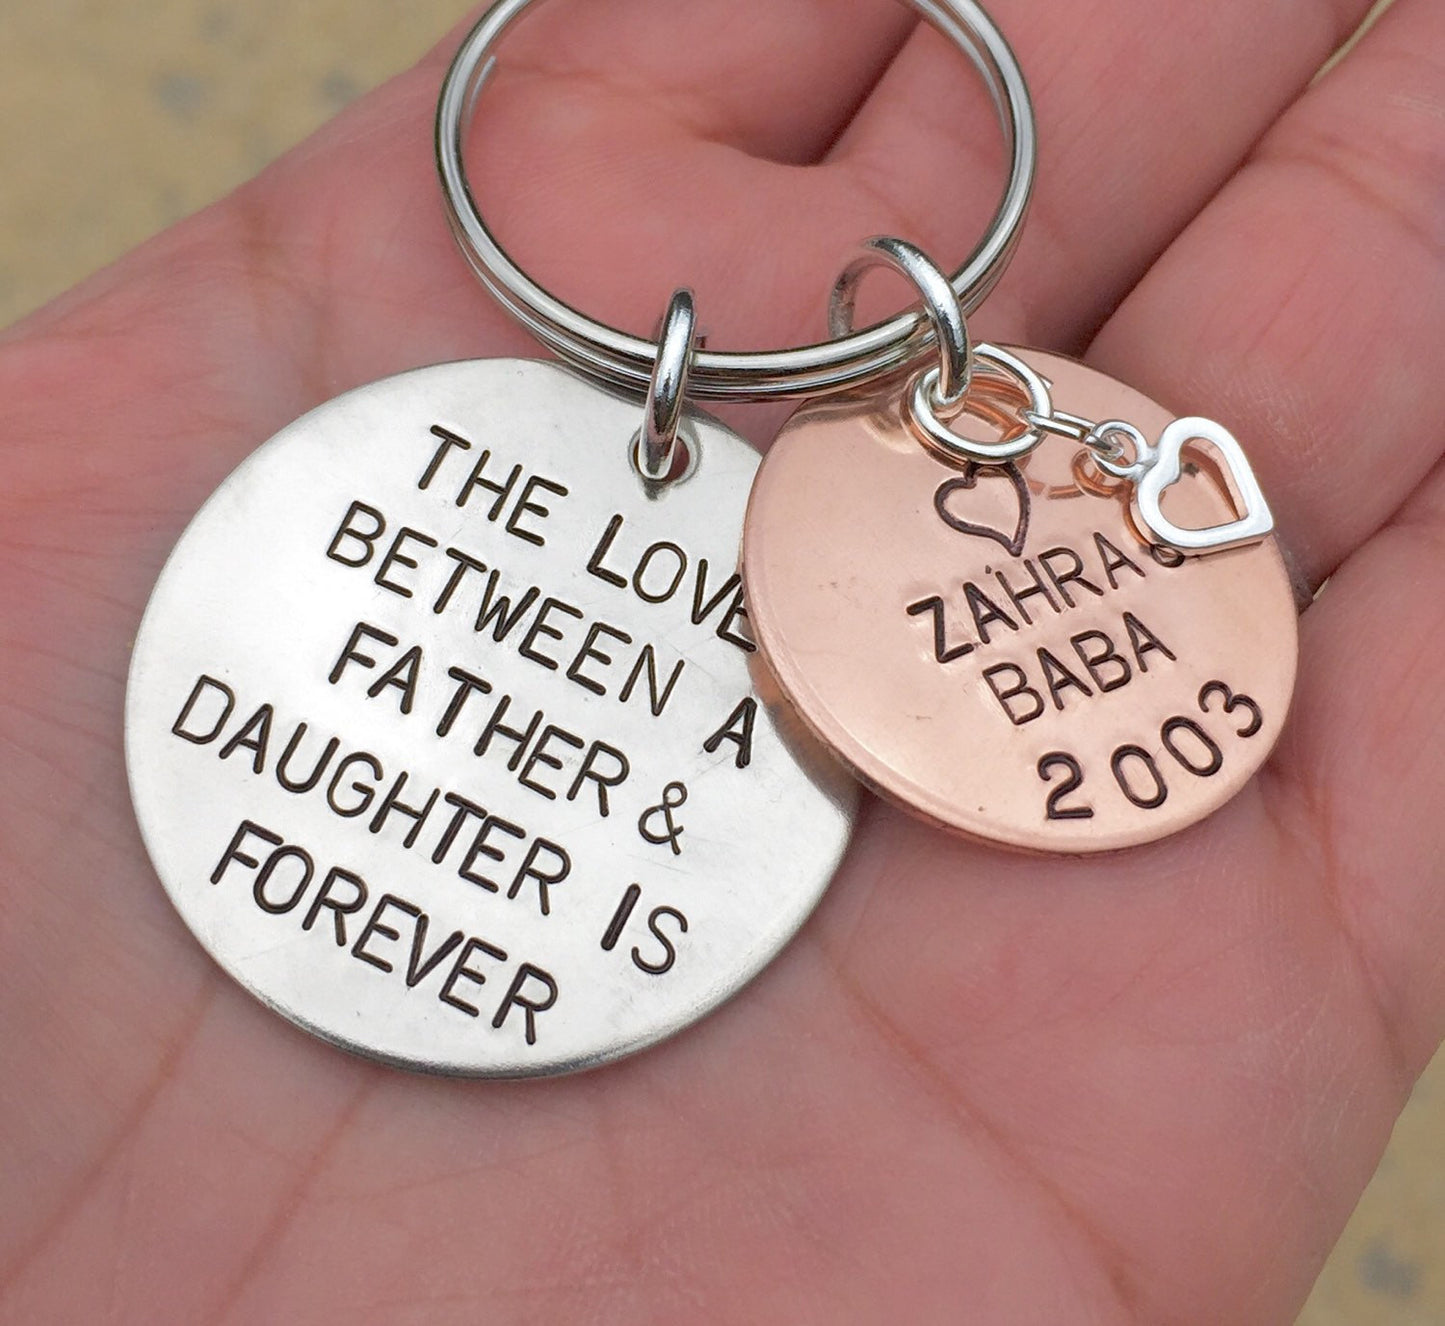 The Love Between A Father and Daughter is Forever, Father Daughter keychain, Personalized Keychain,Custom Father Daughter, from dad - Natashaaloha, jewelry, bracelets, necklace, keychains, fishing lures, gifts for men, charms, personalized, 